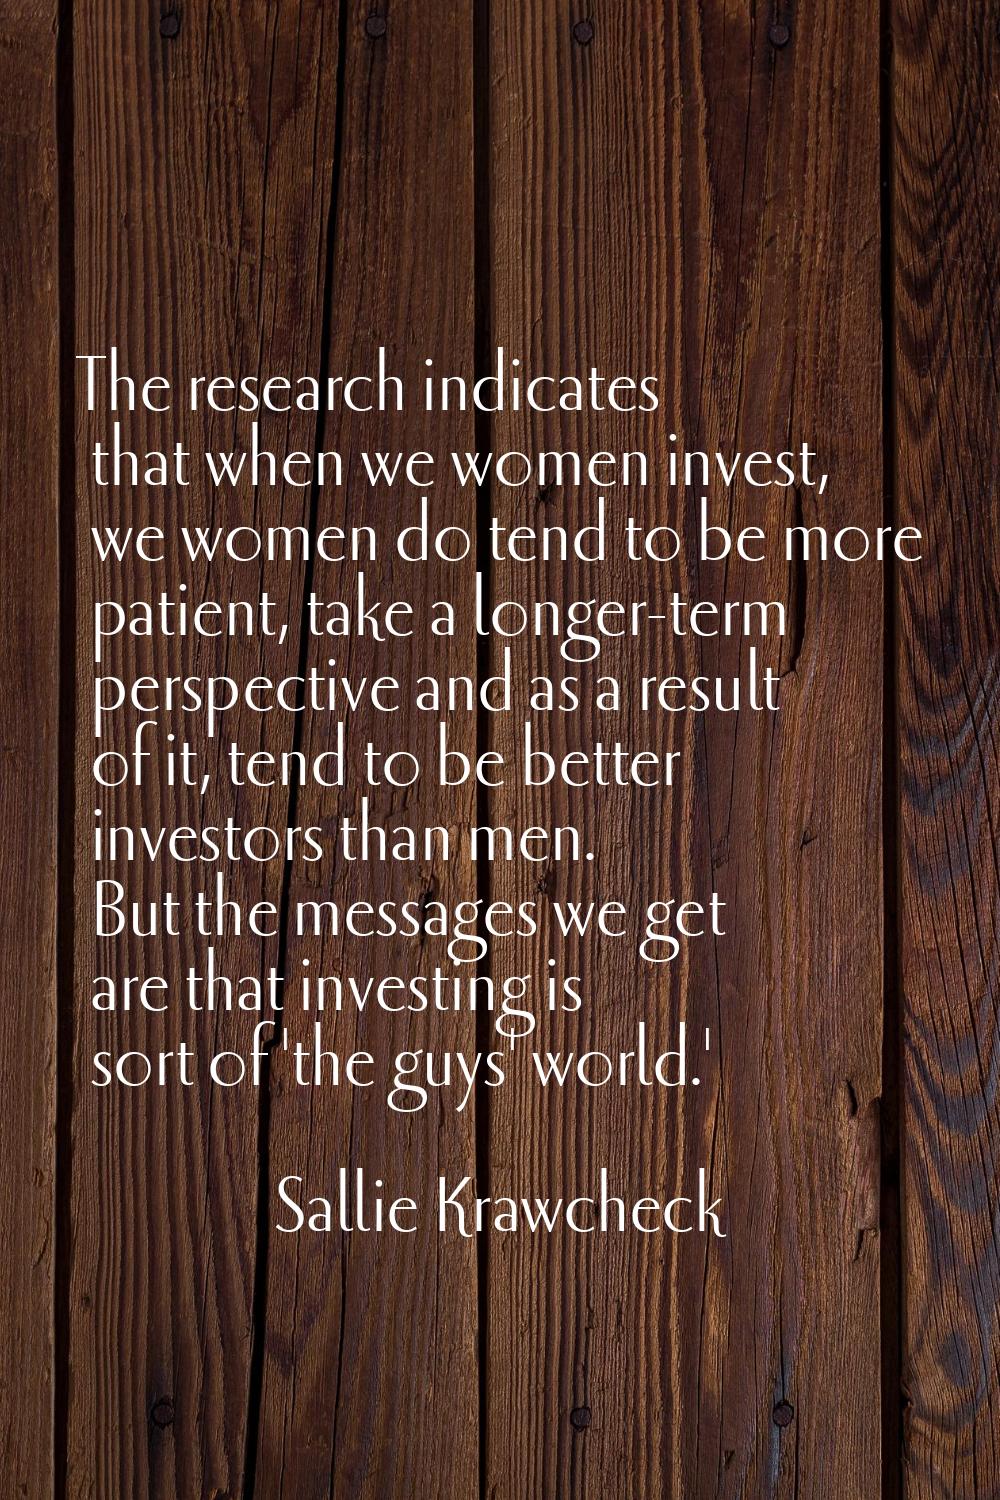 The research indicates that when we women invest, we women do tend to be more patient, take a longe